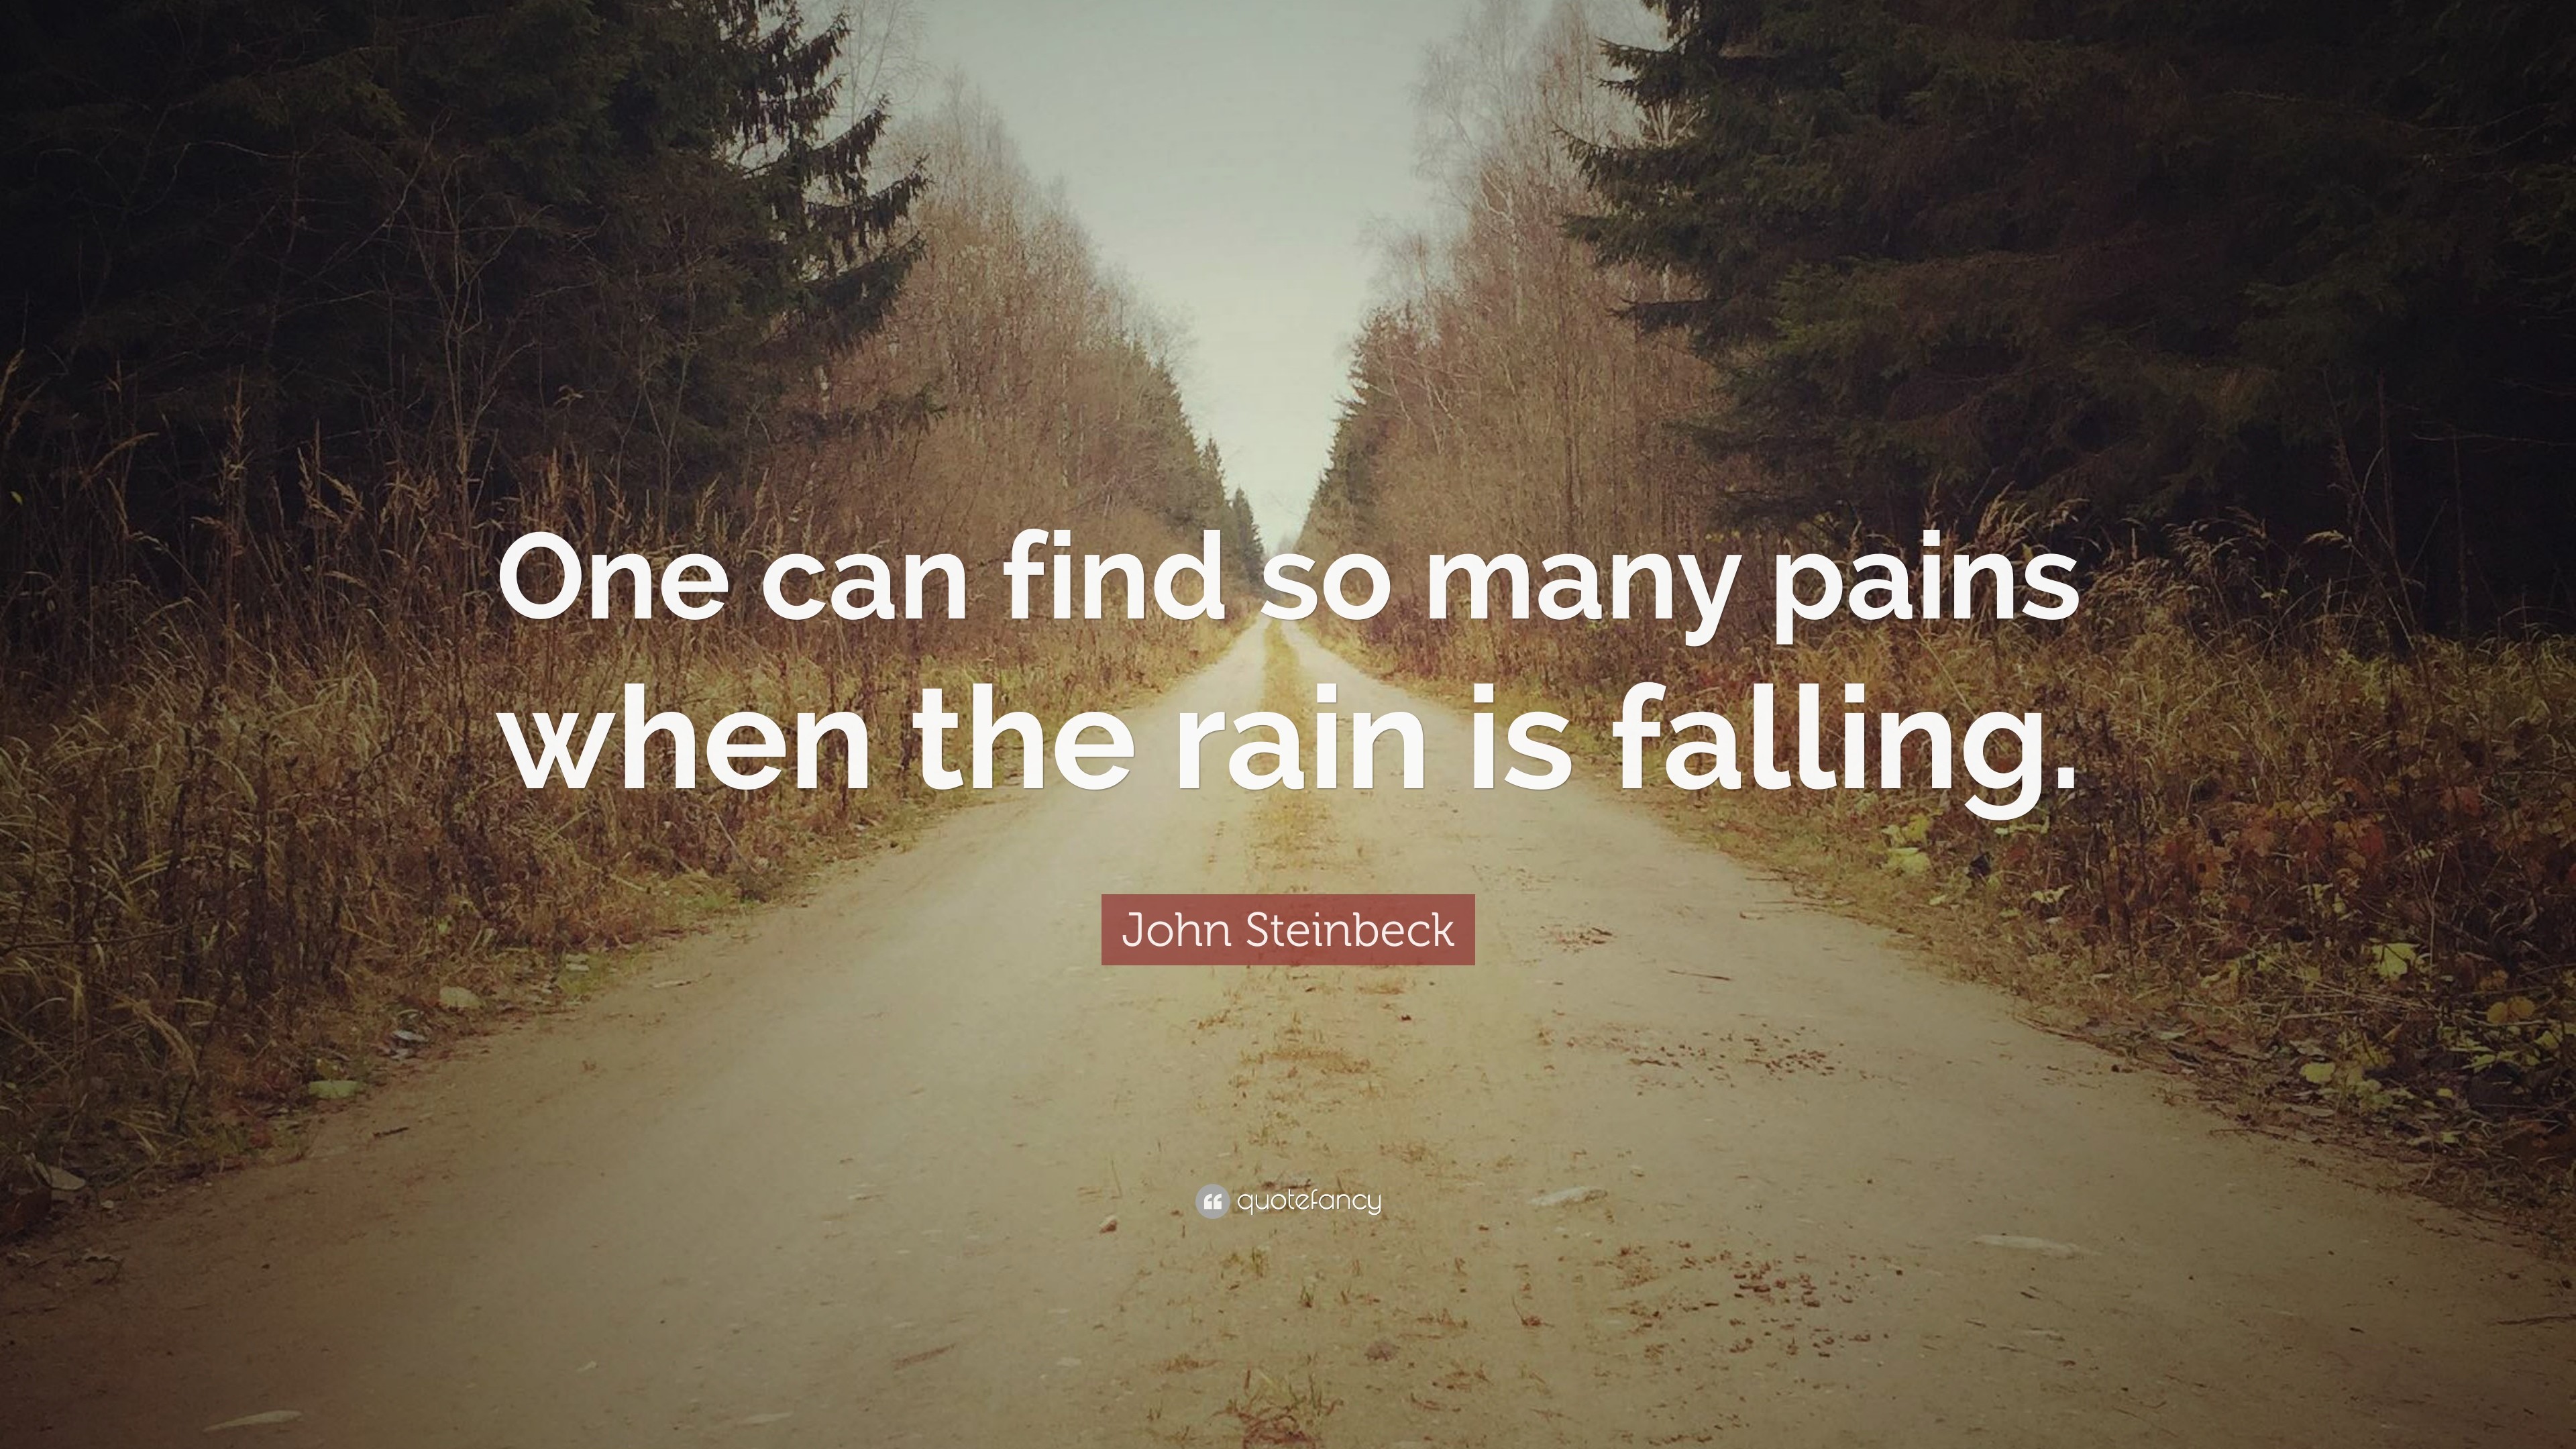 3840x2160 John Steinbeck Quote: “One can find so many pains when the rain is falling